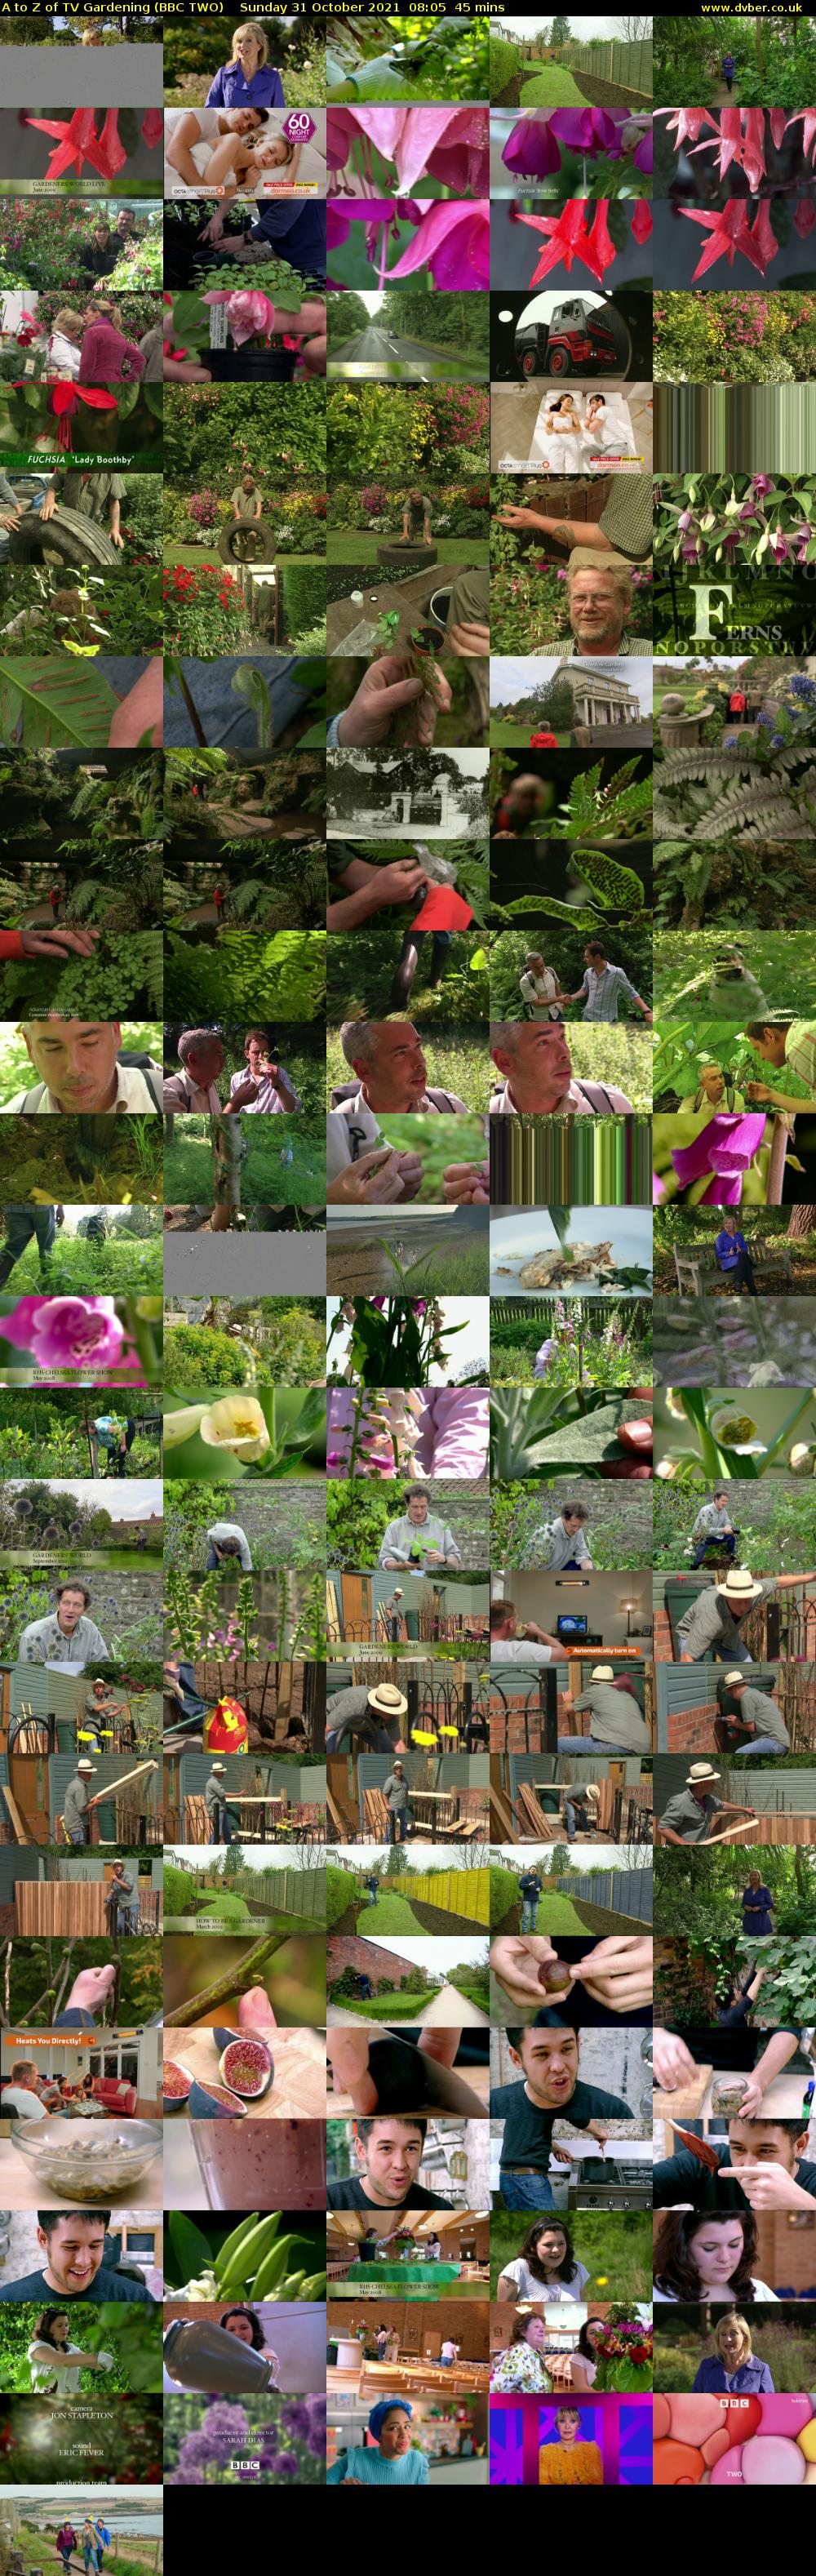 A to Z of TV Gardening (BBC TWO) Sunday 31 October 2021 08:05 - 08:50